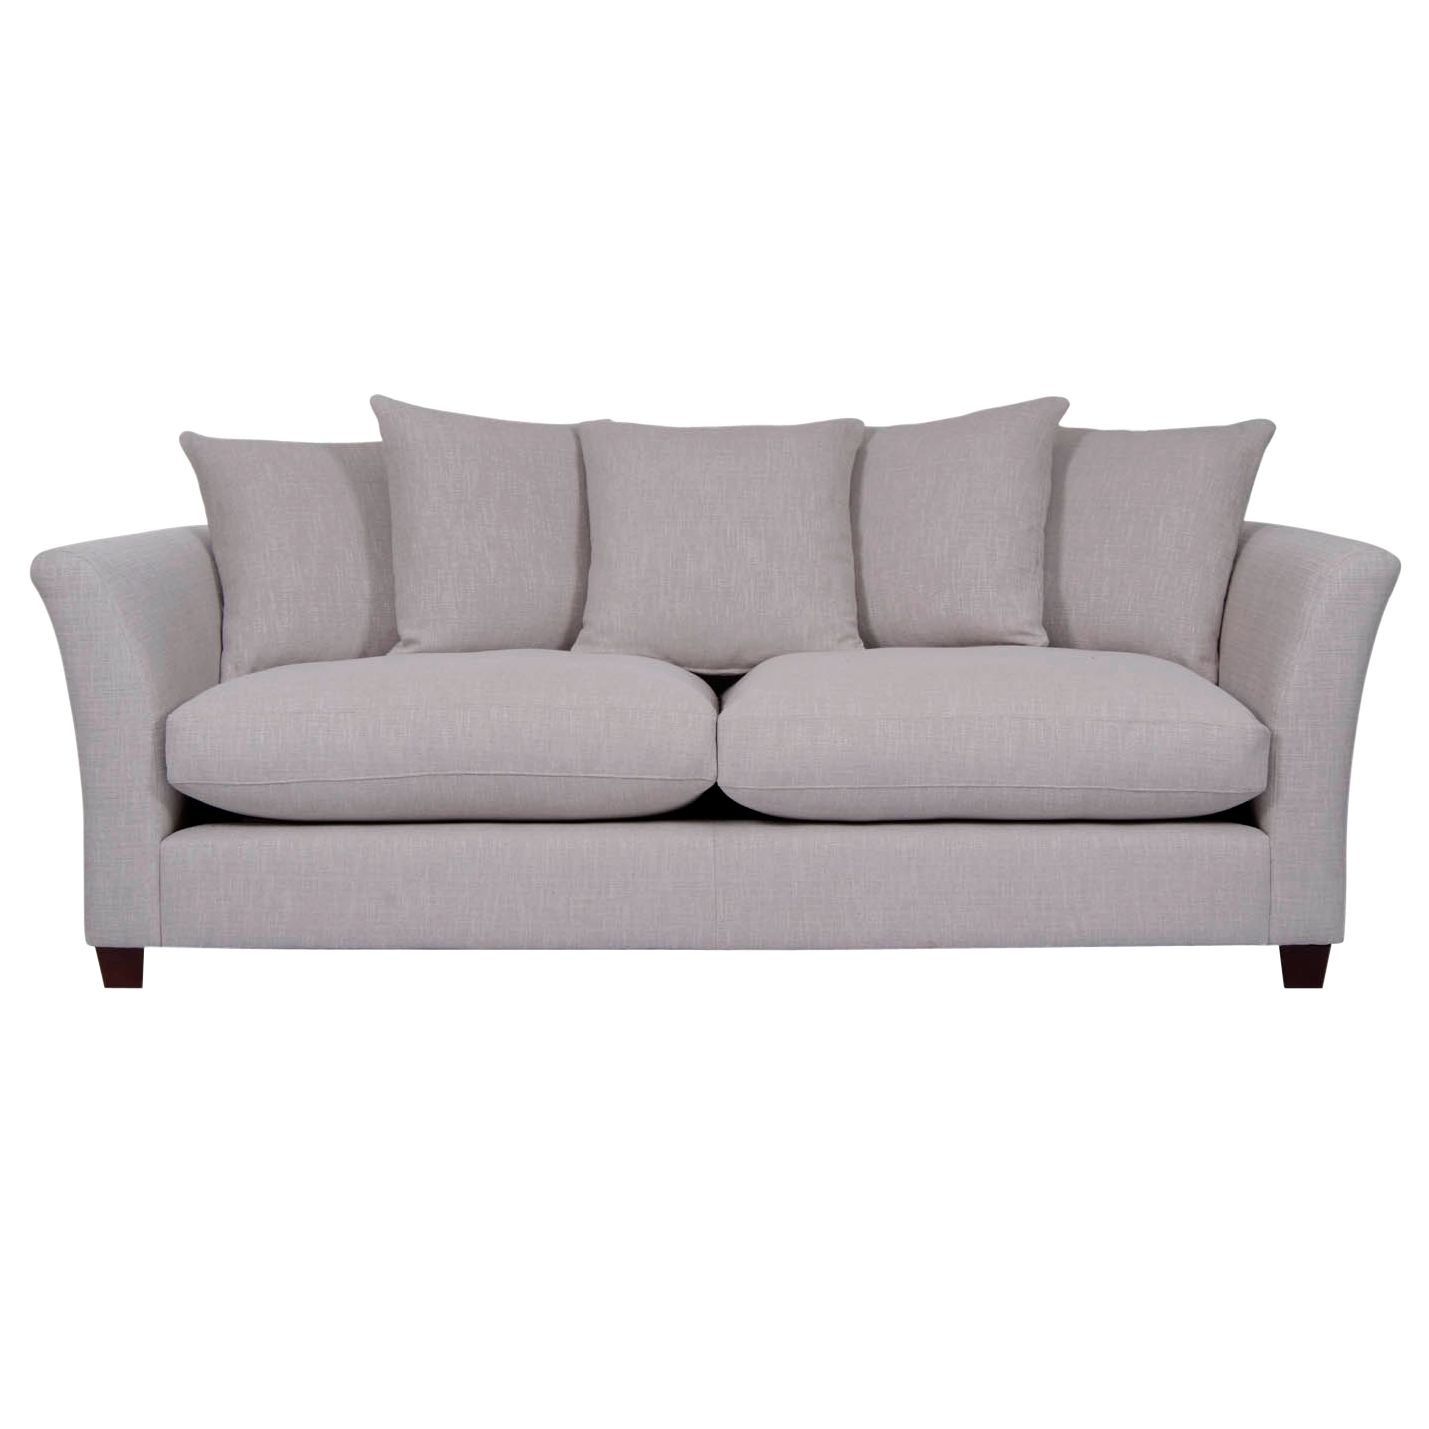 John Lewis Options Scatter Back Flared Arm Grand Sofa, Ice at John Lewis